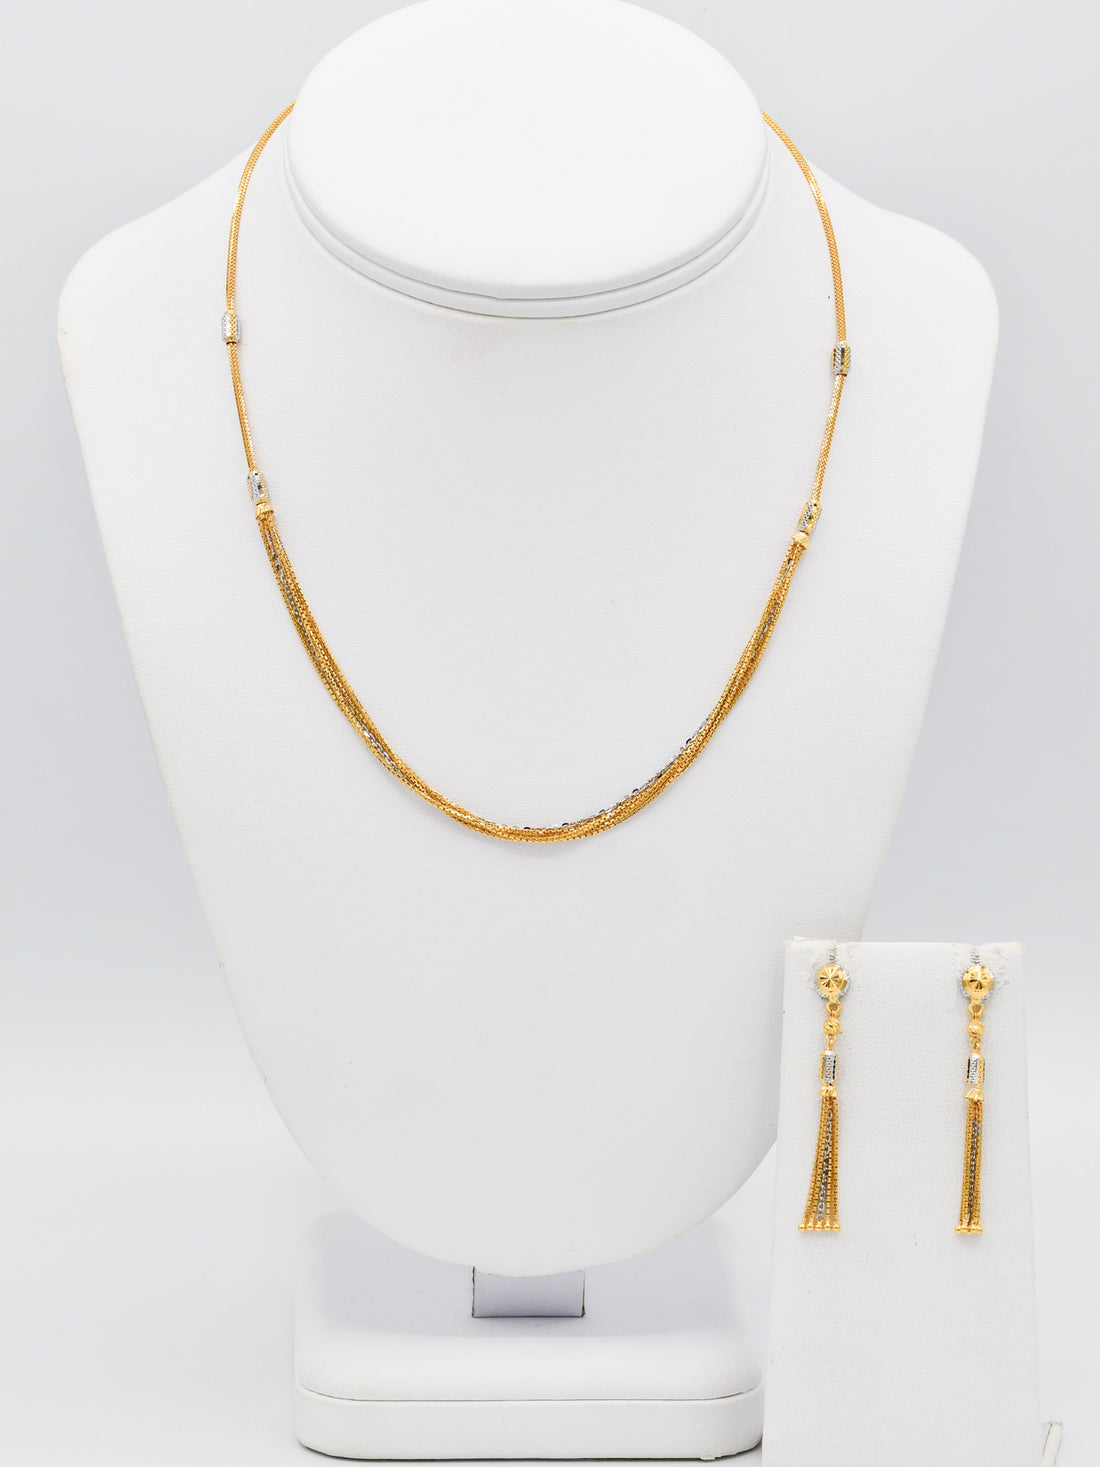 22ct Gold Two Tone 5 Row Necklace Set